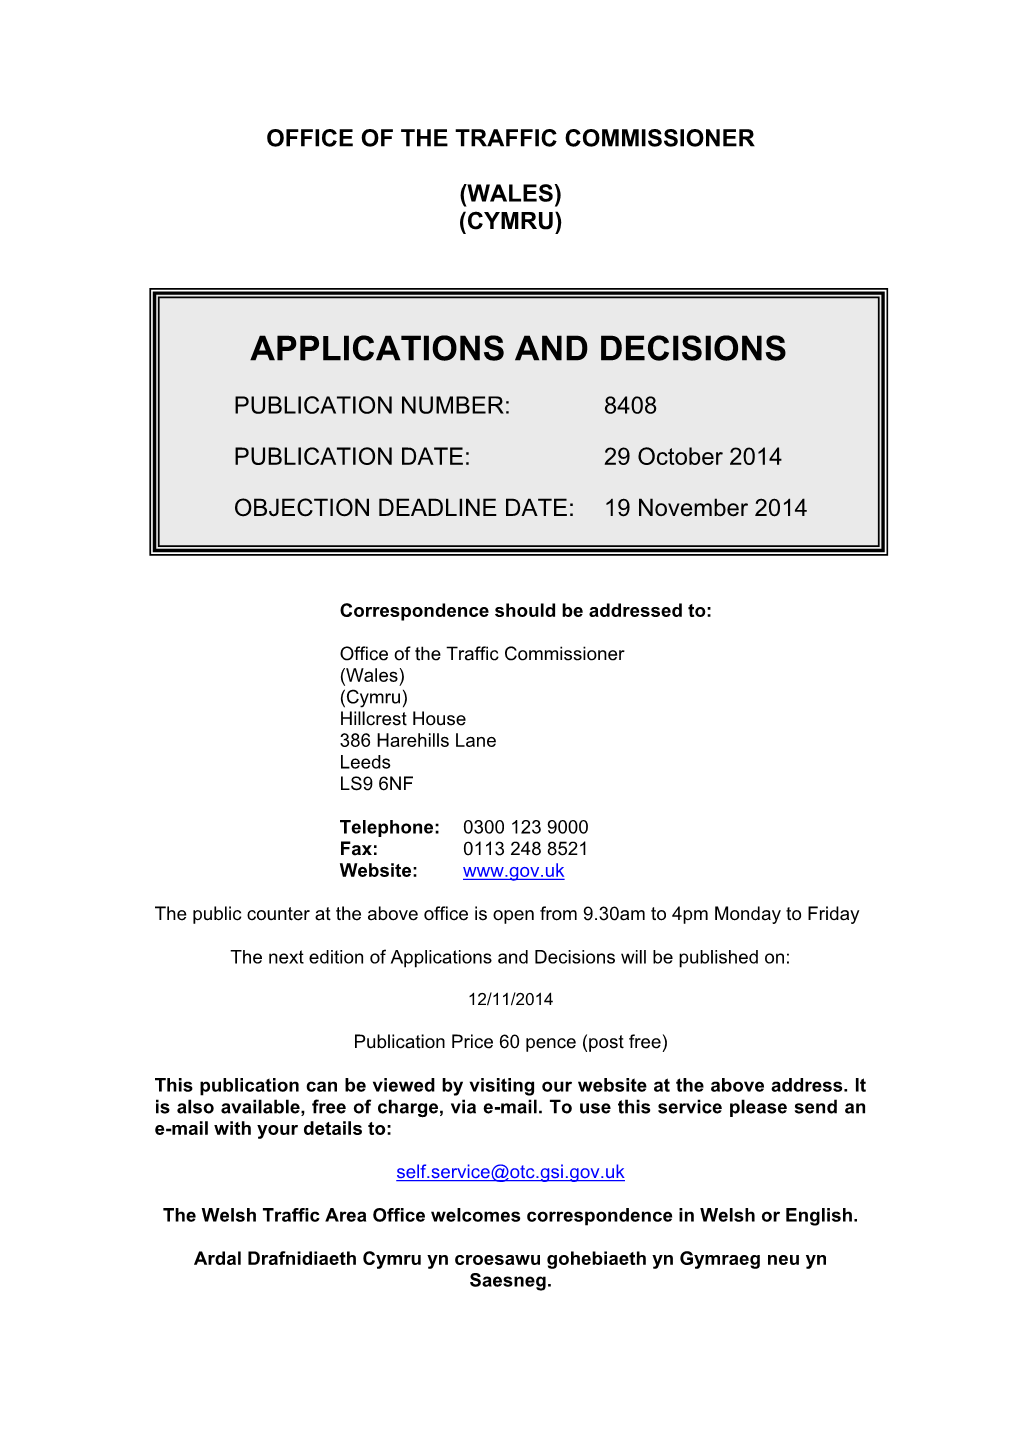 Applications and Decisions 29 October 2014